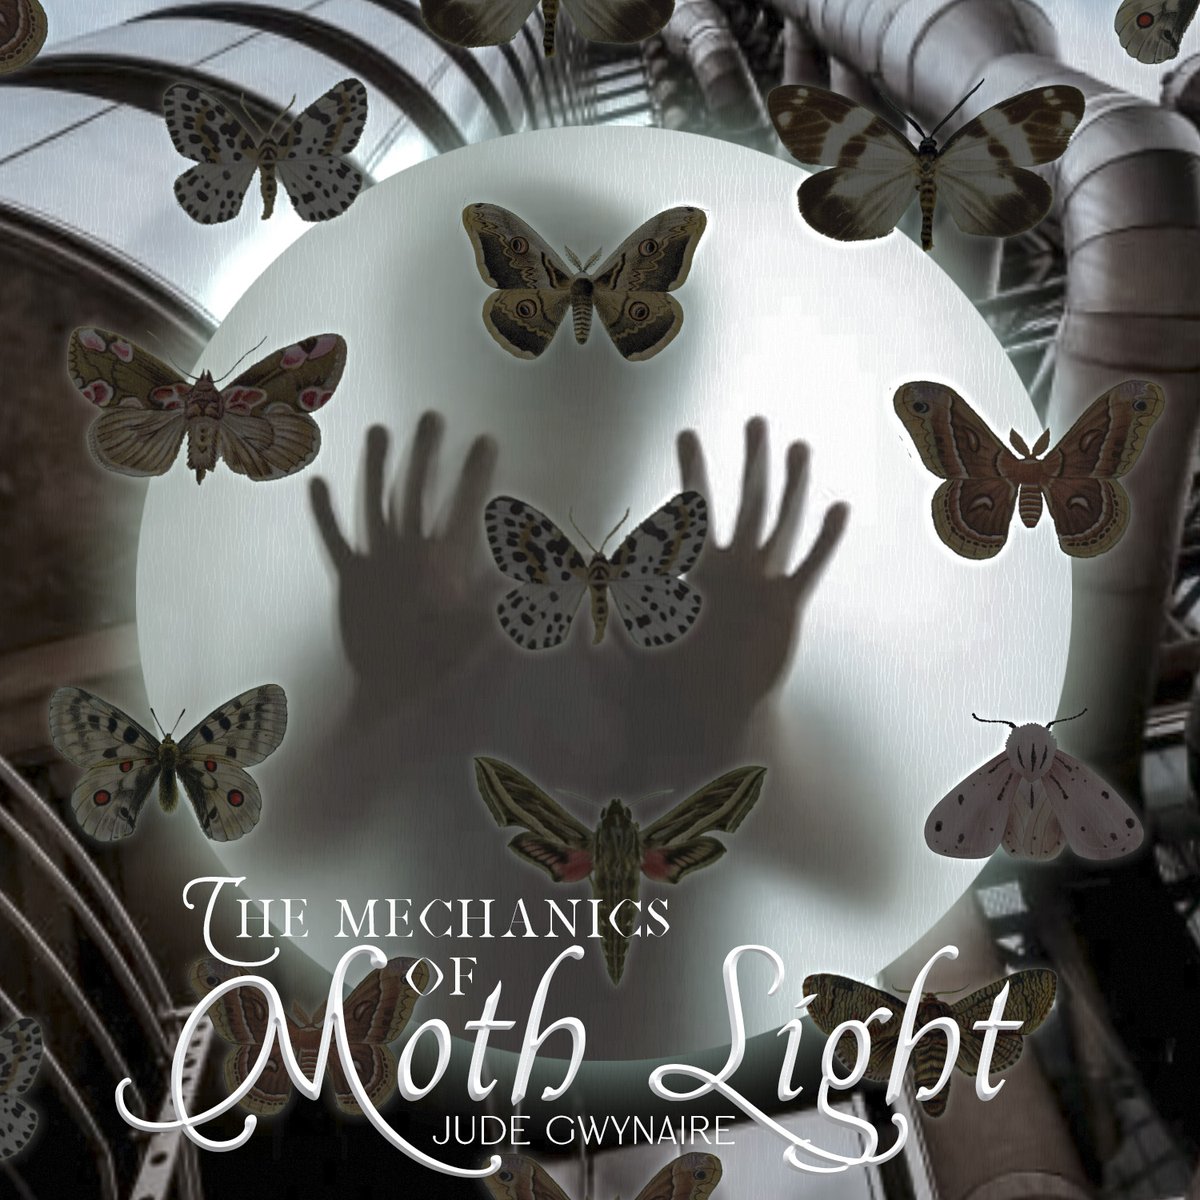 Check out my single, 'Vox 23 (SW9 Mix)' from my new album 'The Mechanics of Moth Light'! 🎹
open.spotify.com/album/0LWtigpX…
judegwynaire.com
#newmusic #indiemusic #composer #industrialmusic #urban #darksynth #electronica #drone #dark #noise #experimental #darkambientmusic